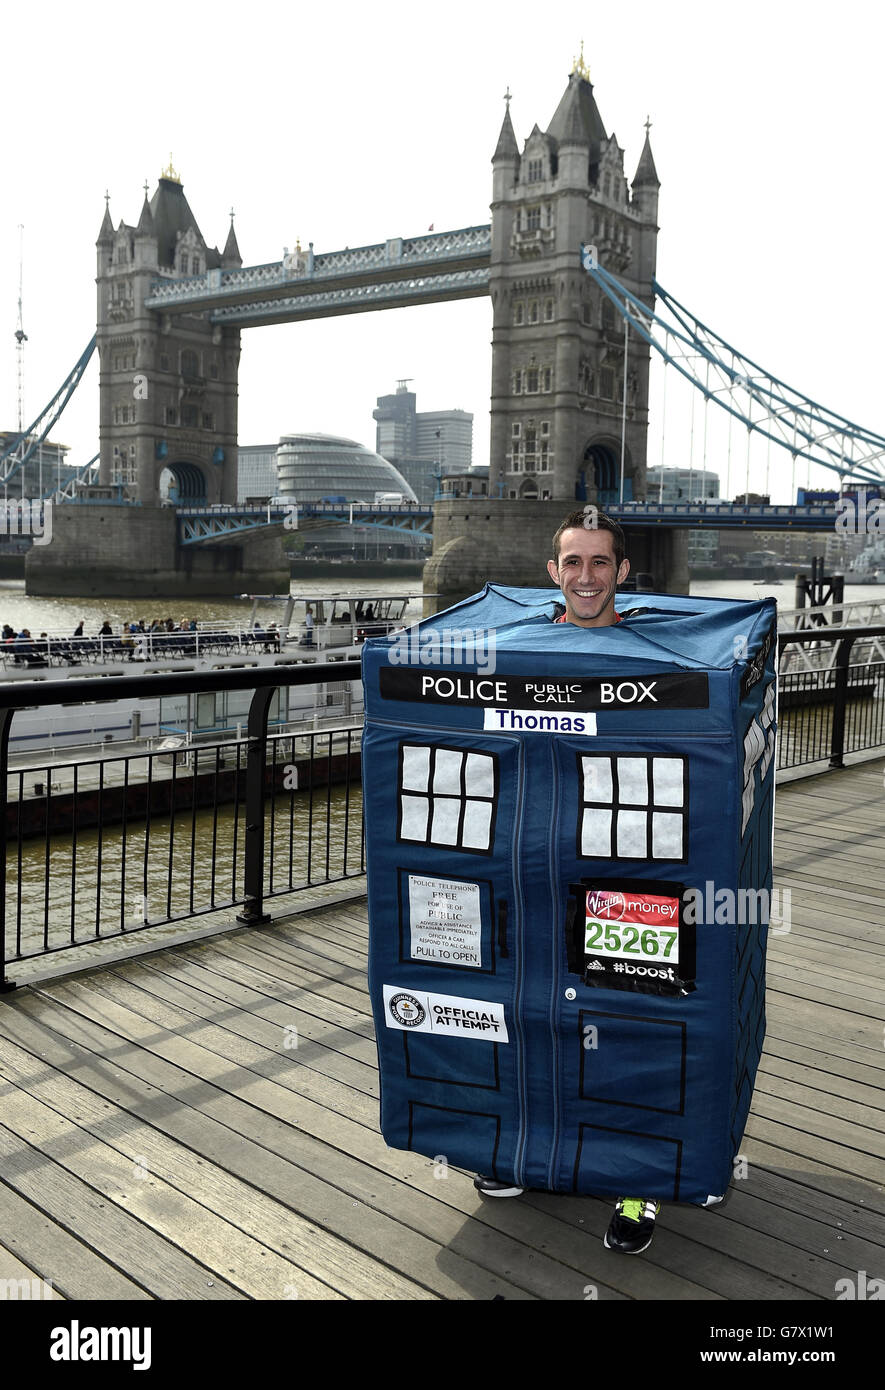 Thomas Bolton from Loughborough, who is attempting to run the London marathon as the fastest person dressed as a telephone box, poses for a photograph during a photocall ahead of the Virgin Money London Marathon 2015 at the Tower Hotel, London. Stock Photo